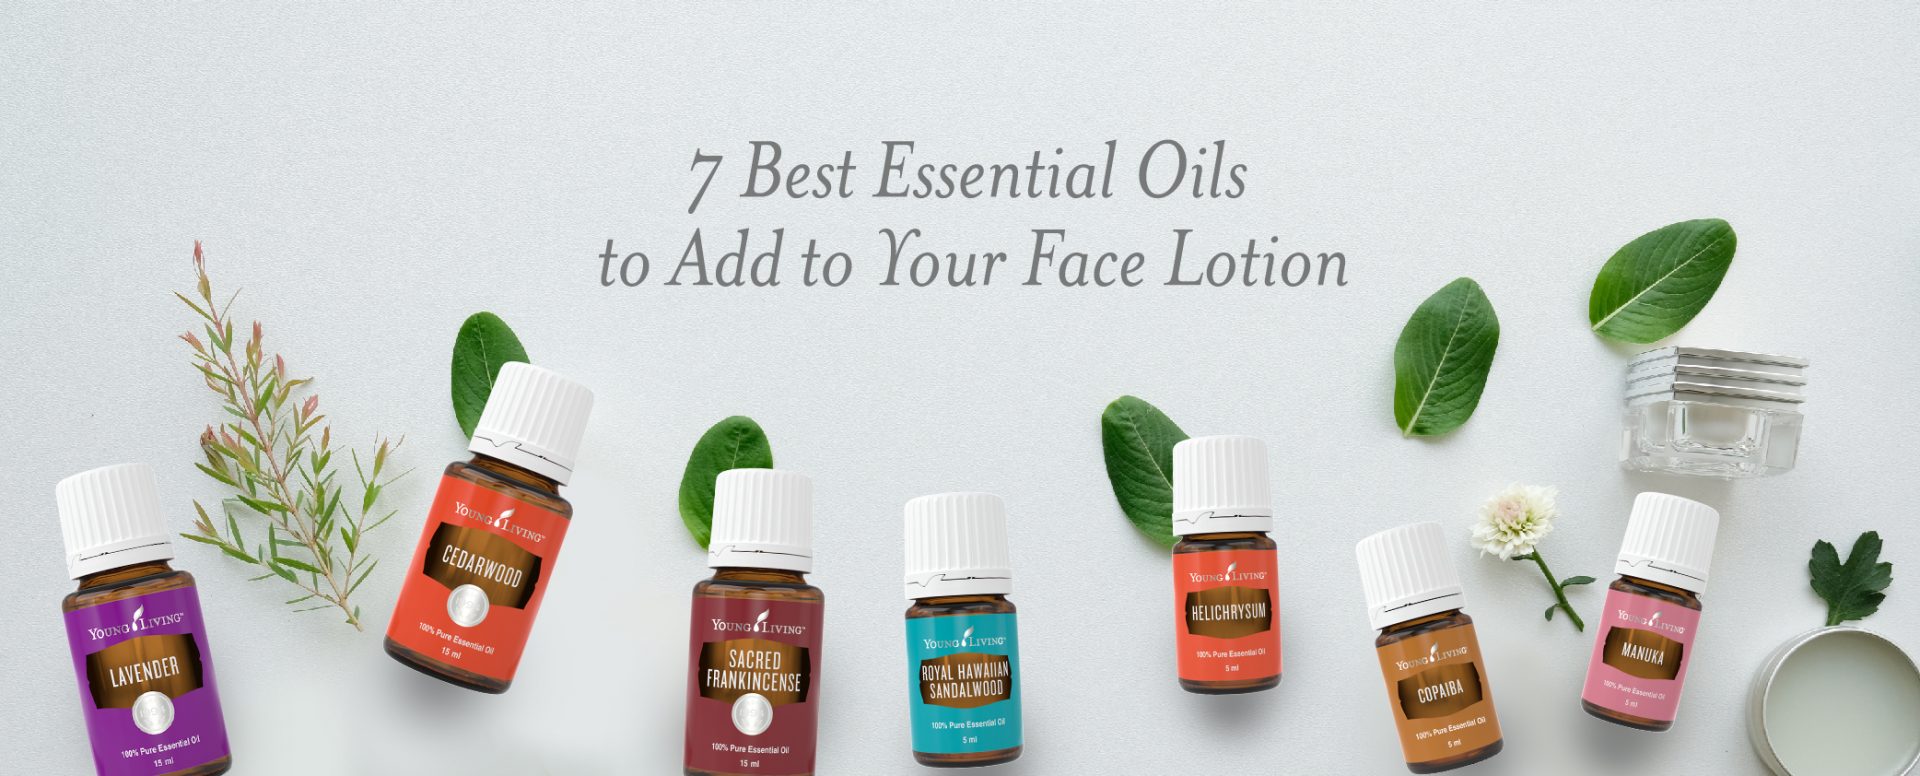 Collection of Young Living Essential Oils for face